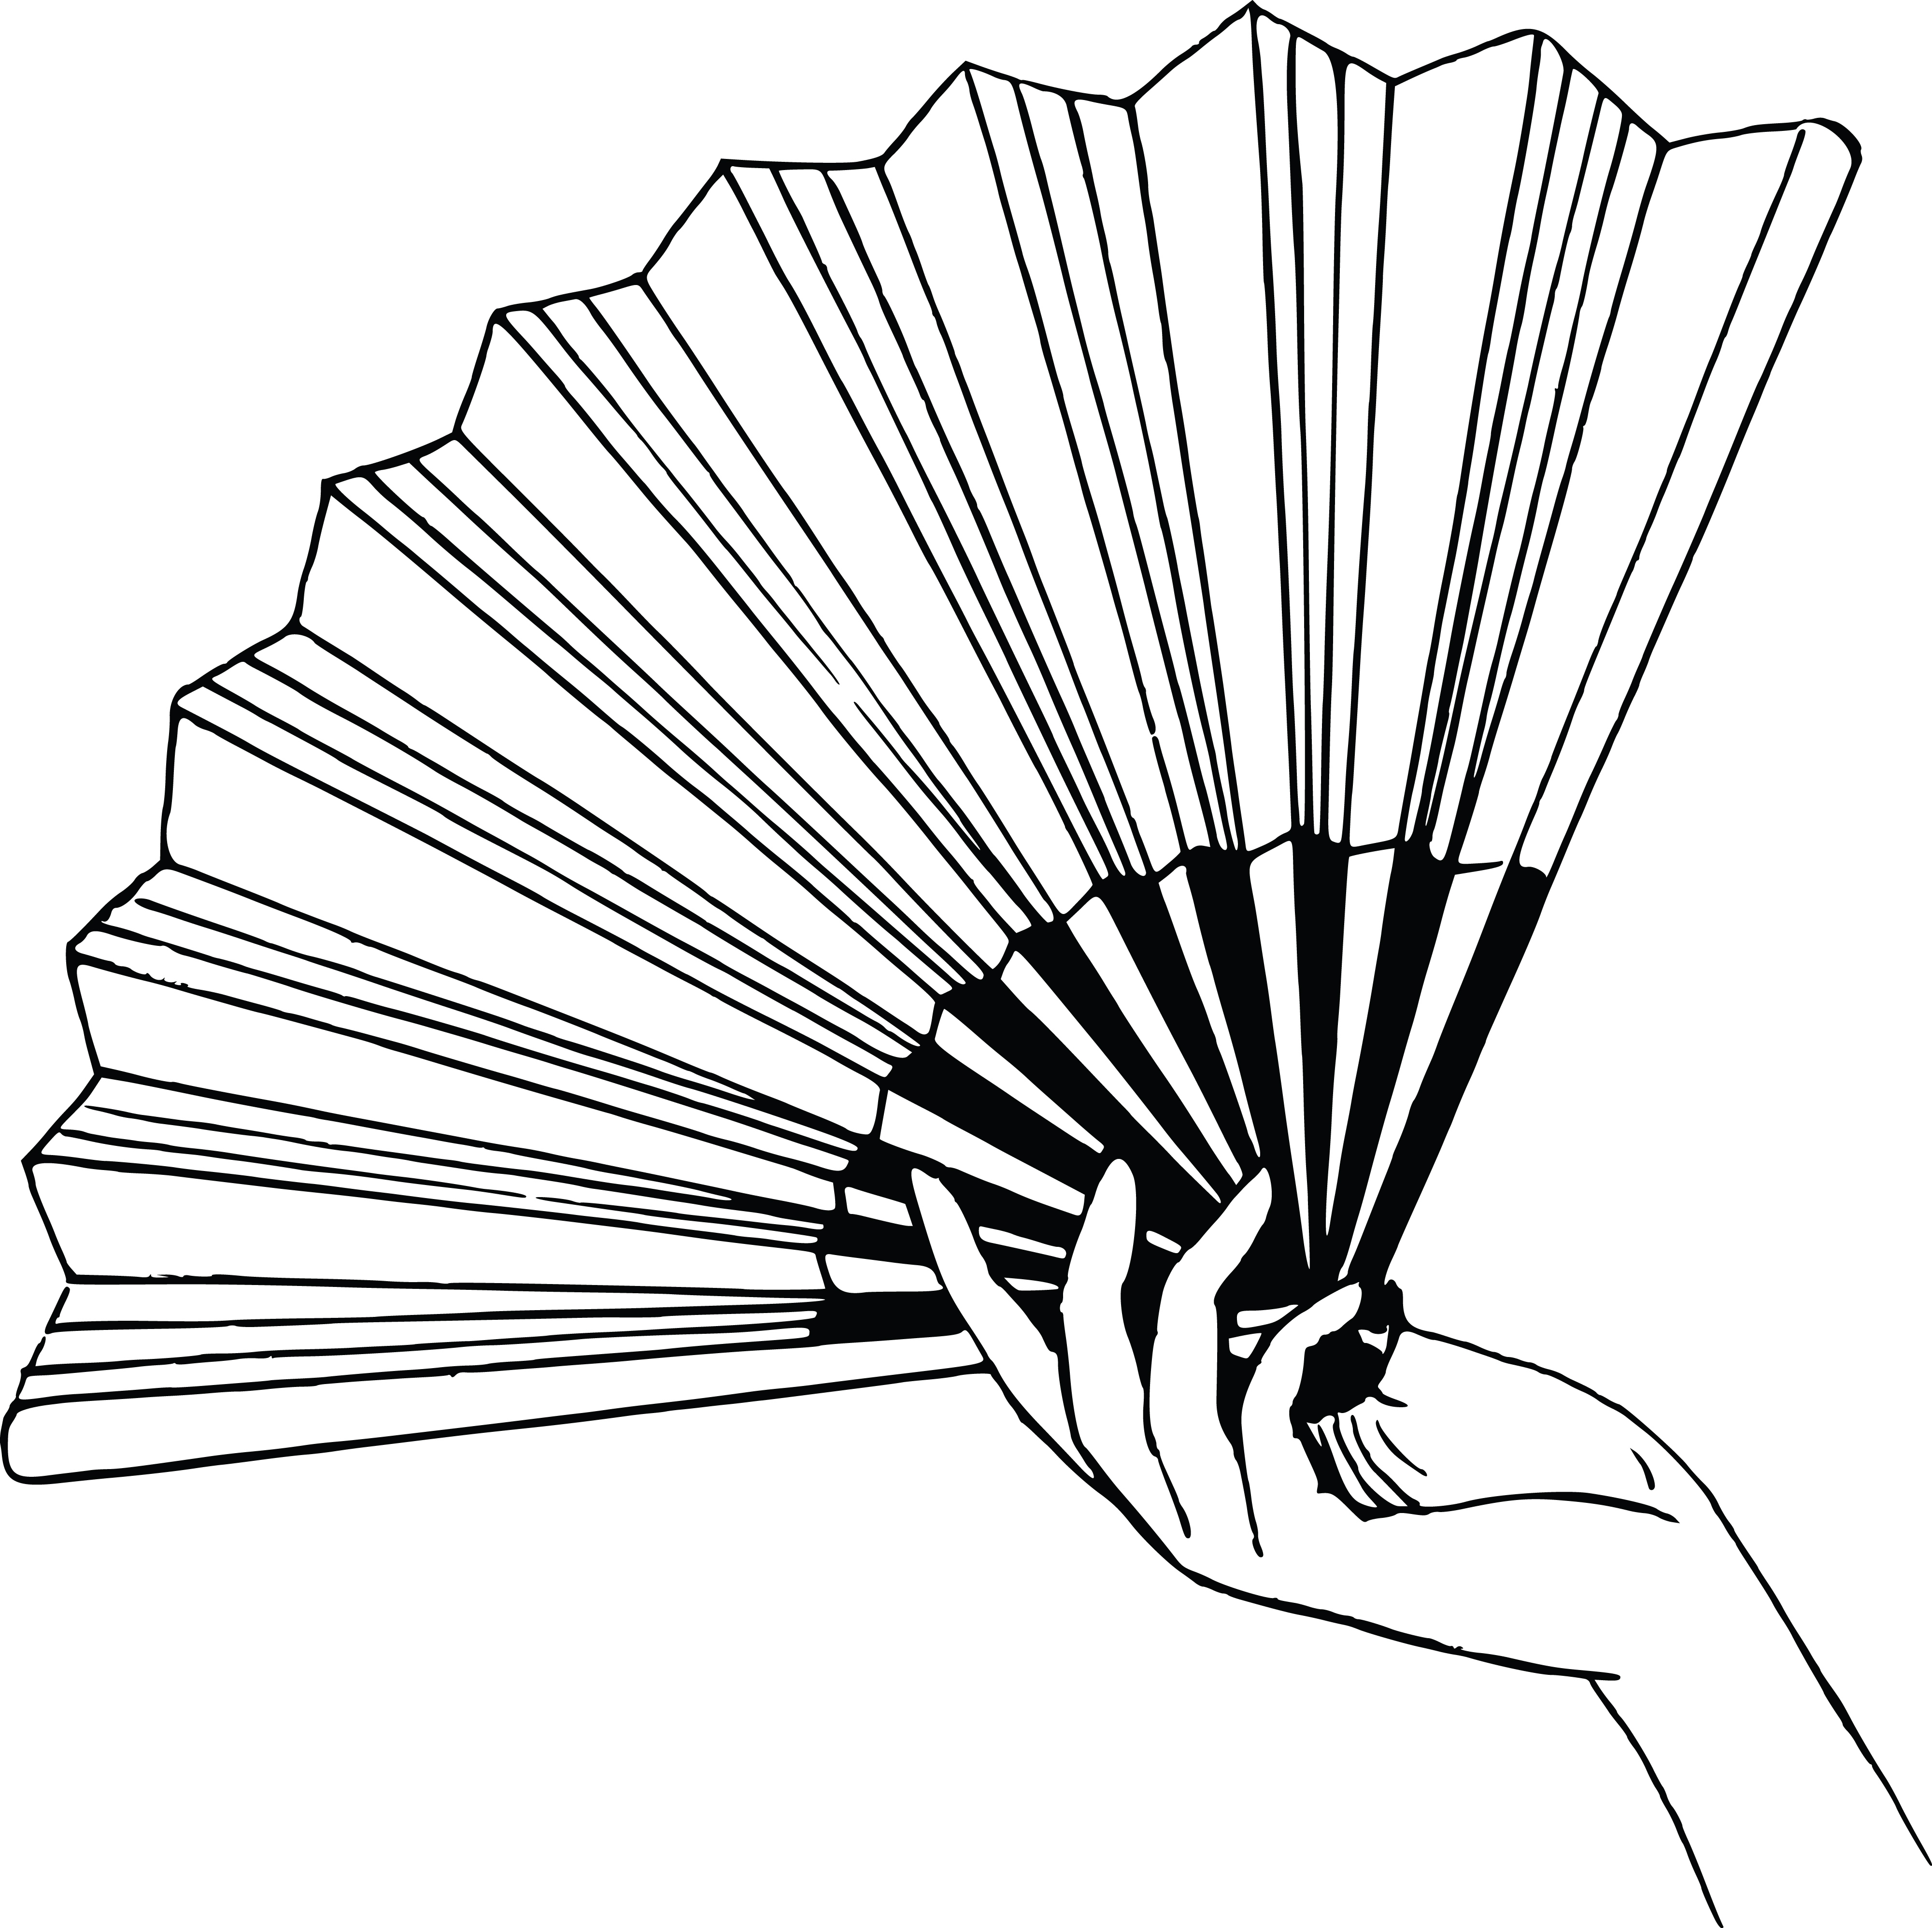 hand fan clipart black and white